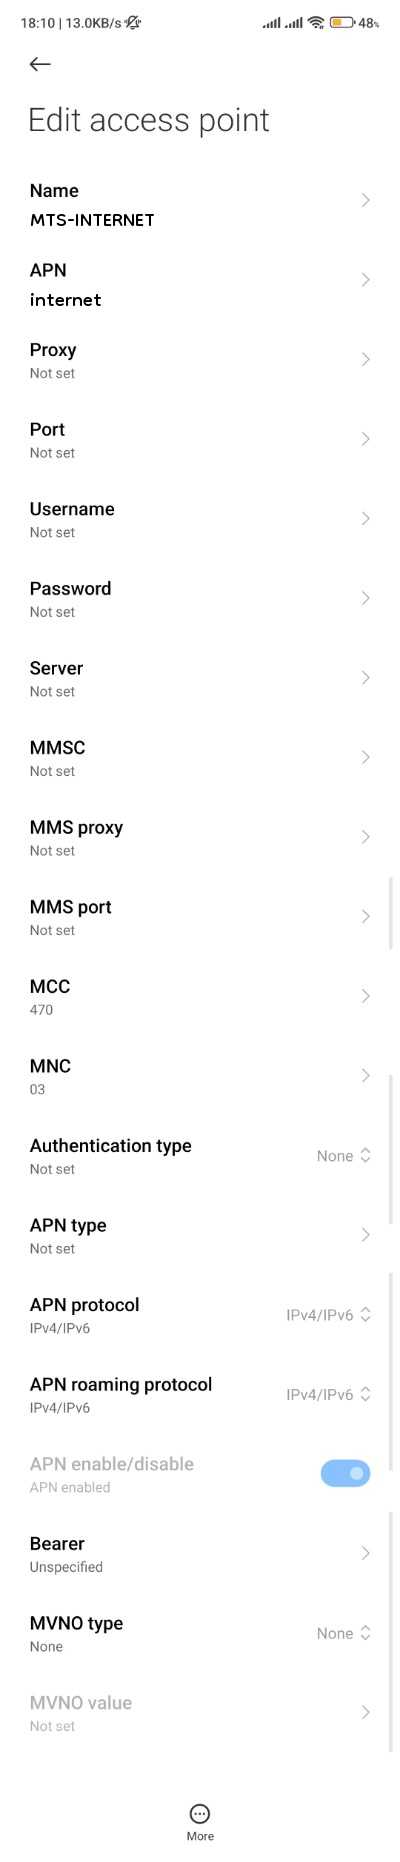 MTS Canada APN Setiings for Android iPhone 3G 4G Internet